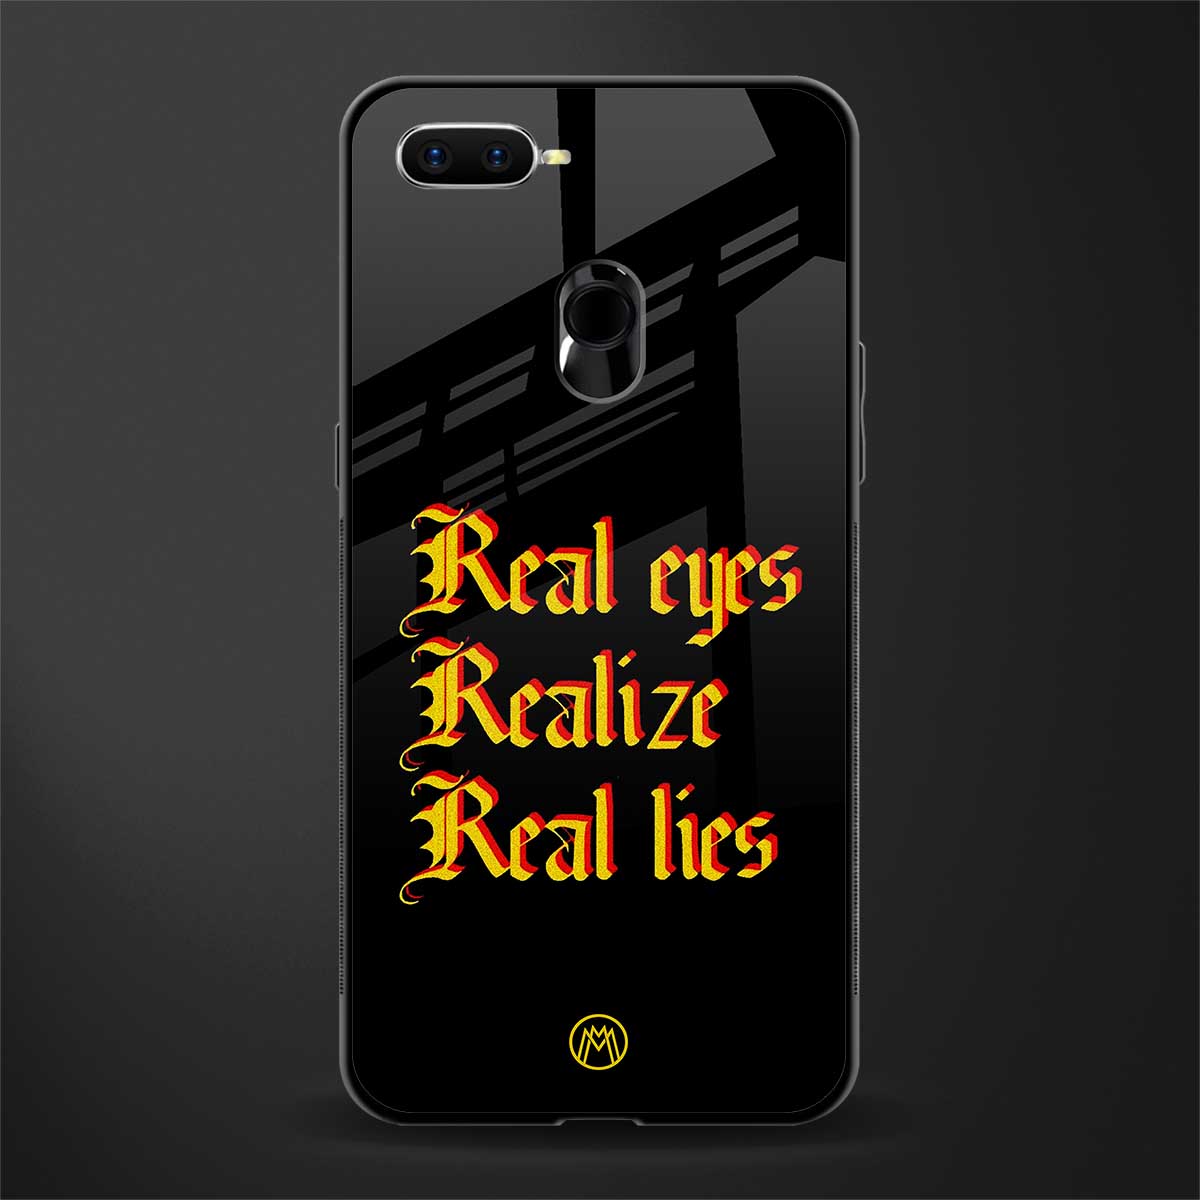 real eyes realize real lies quote glass case for realme 2 pro image